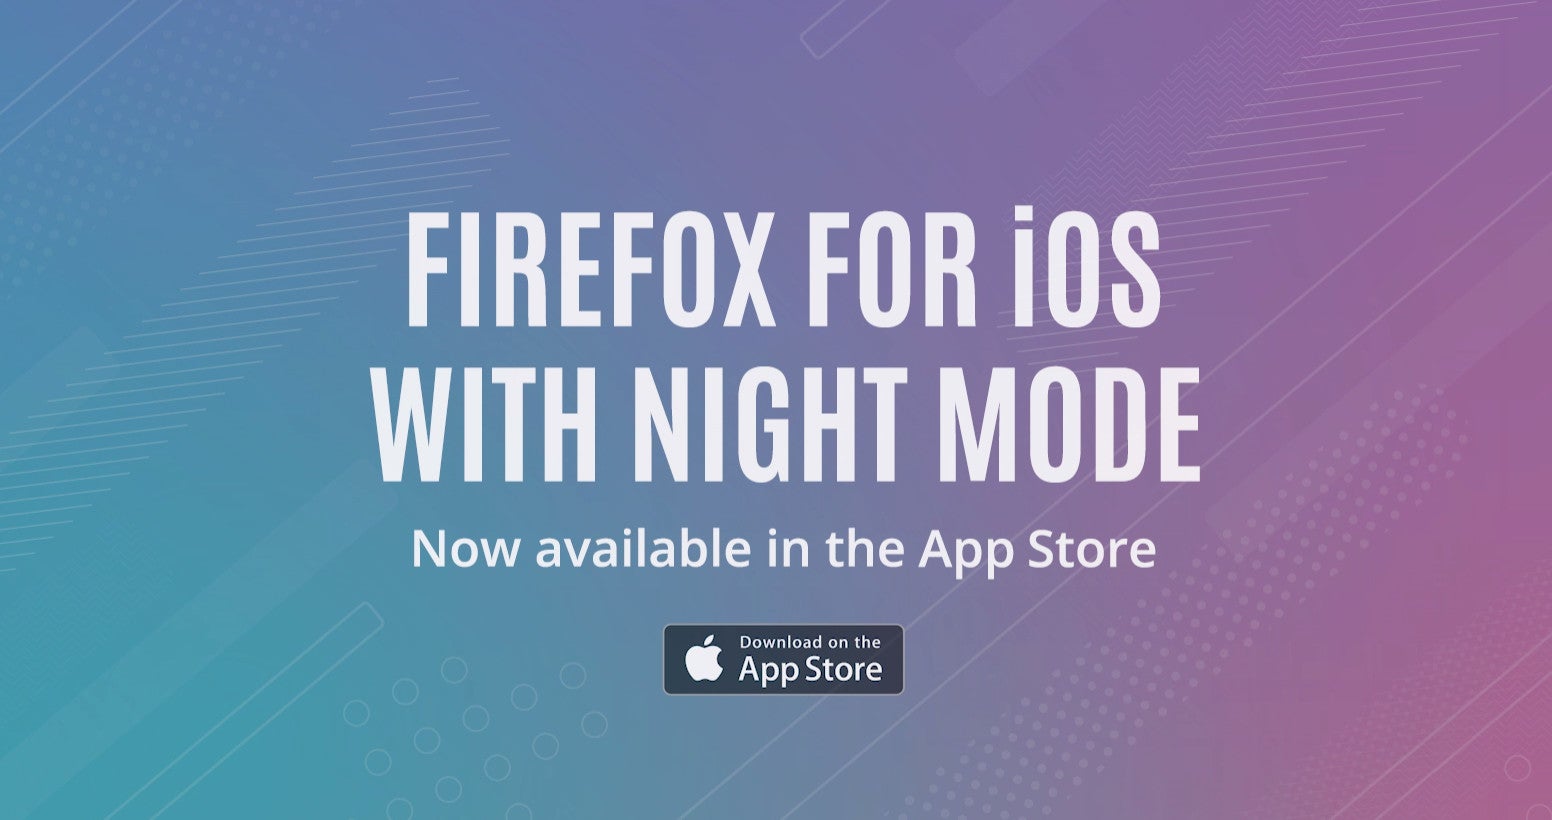 Firefox 8.0 for iOS released with tons of new features: night mode, QR code scanner, more